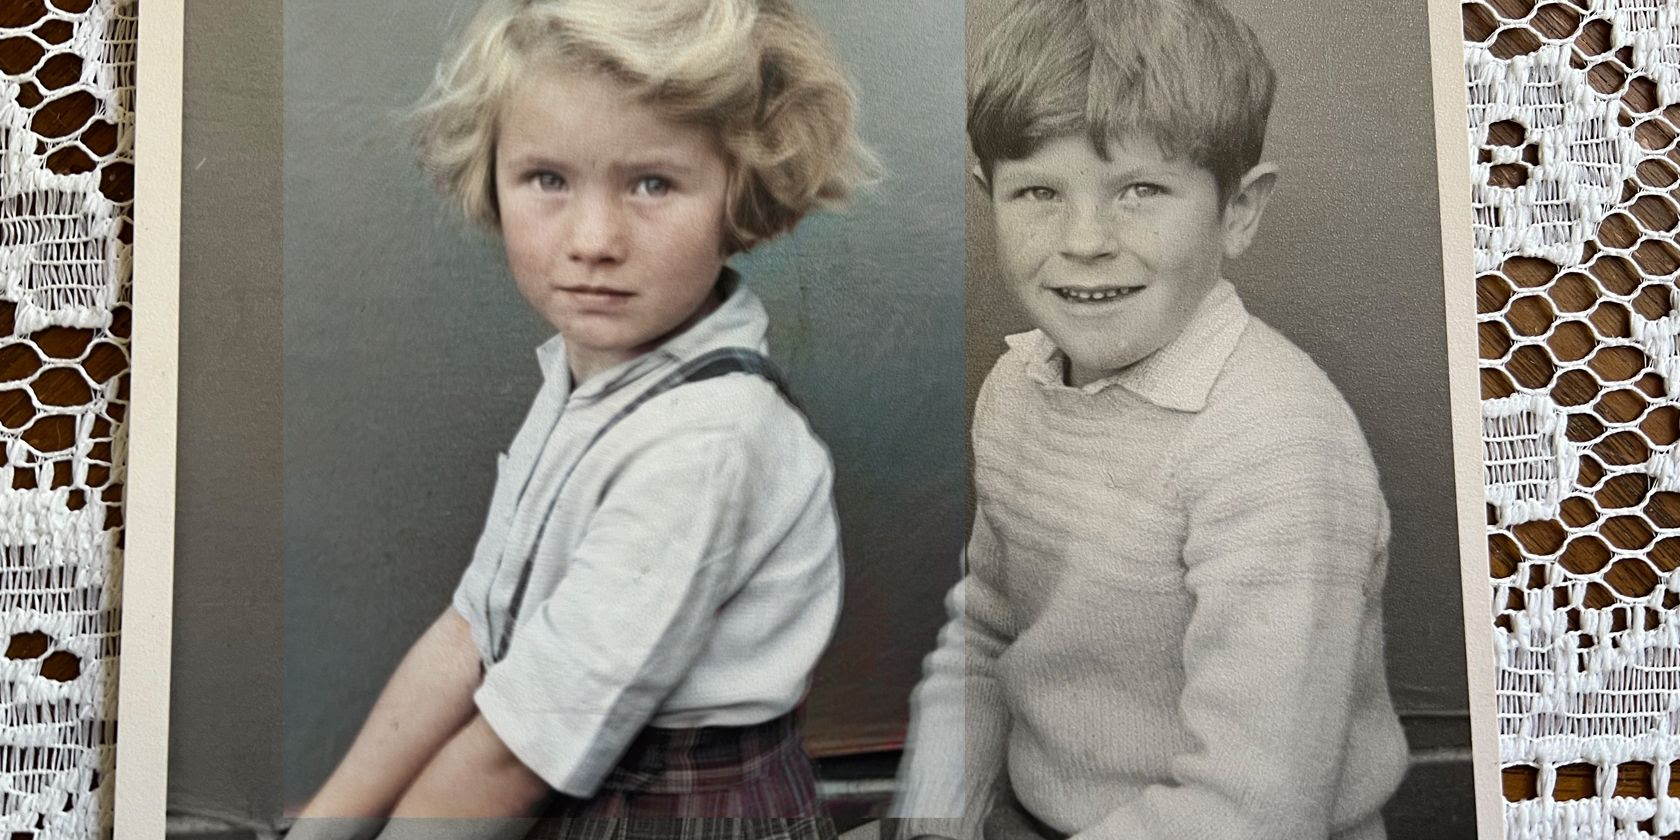 How to Colorize Old Black and White Photos Using Ancestry